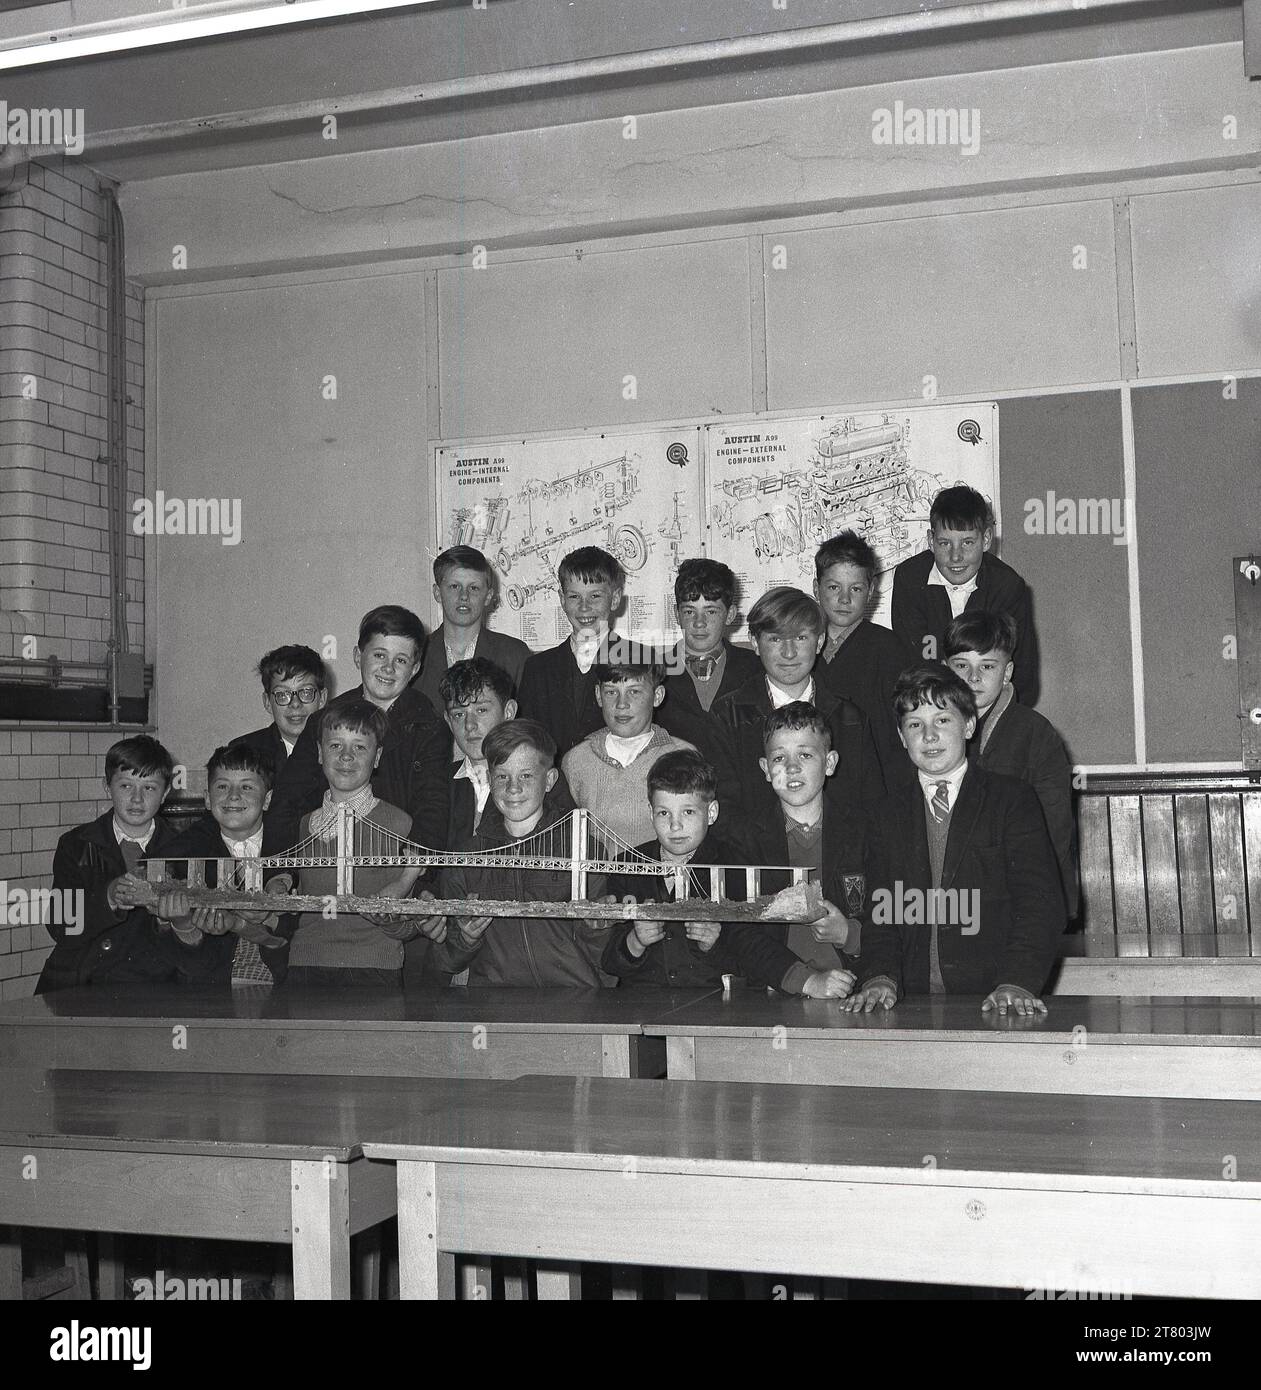 1965, historical, a group of schoolboys in a classroom gathered together for a photo showing their model of the Forth Road Bridge, Fife, Scotland, UK. When the suspension bridge opened in 1964, it was the longest suspension bridge in the world.  Behind the boys, on the wall, diagrams for the engine of an Austin A99, a popular motorcar of the era. Stock Photo